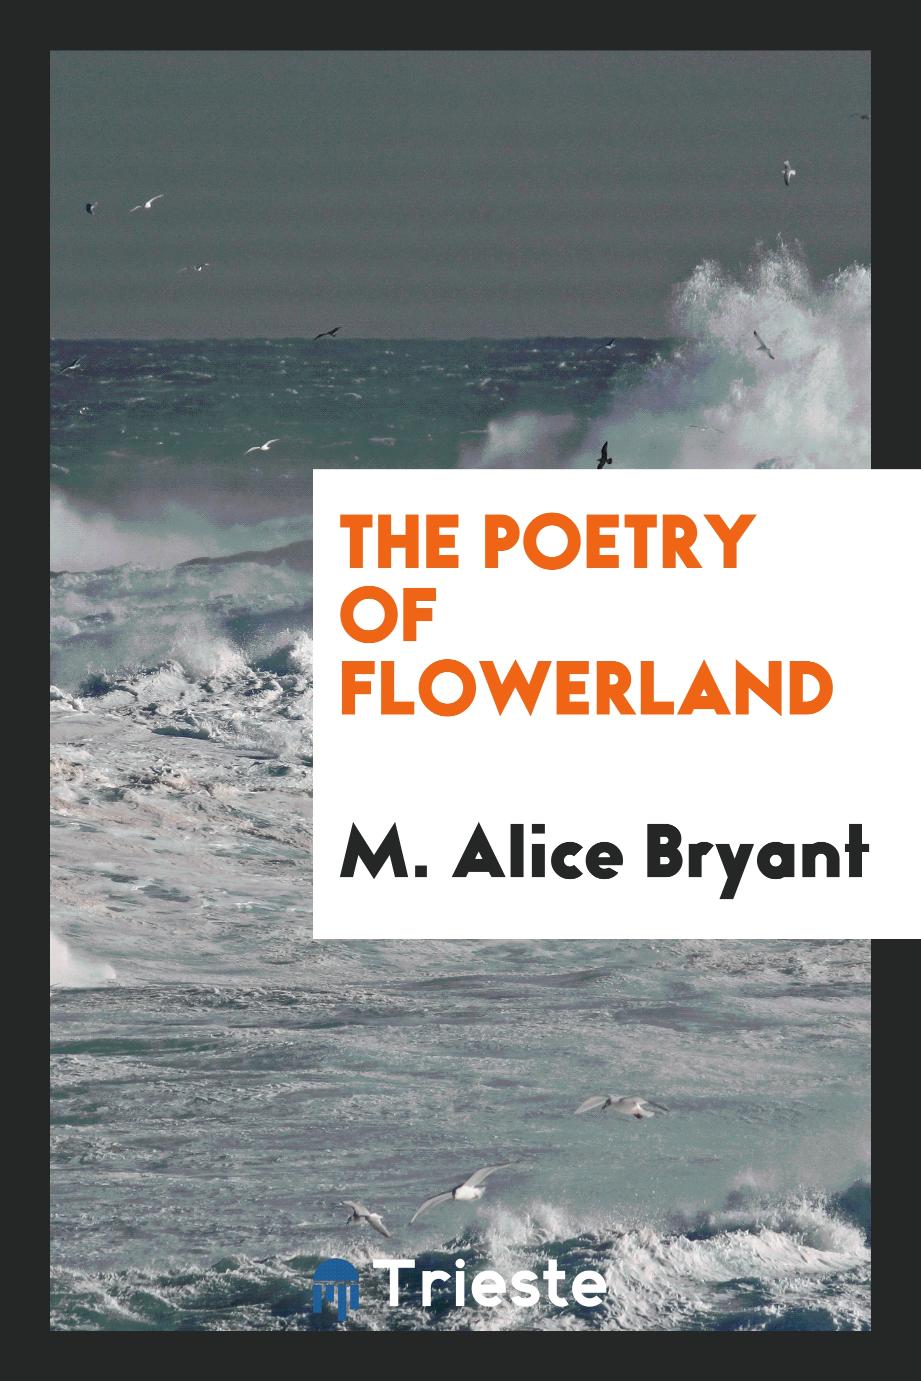 The Poetry of Flowerland